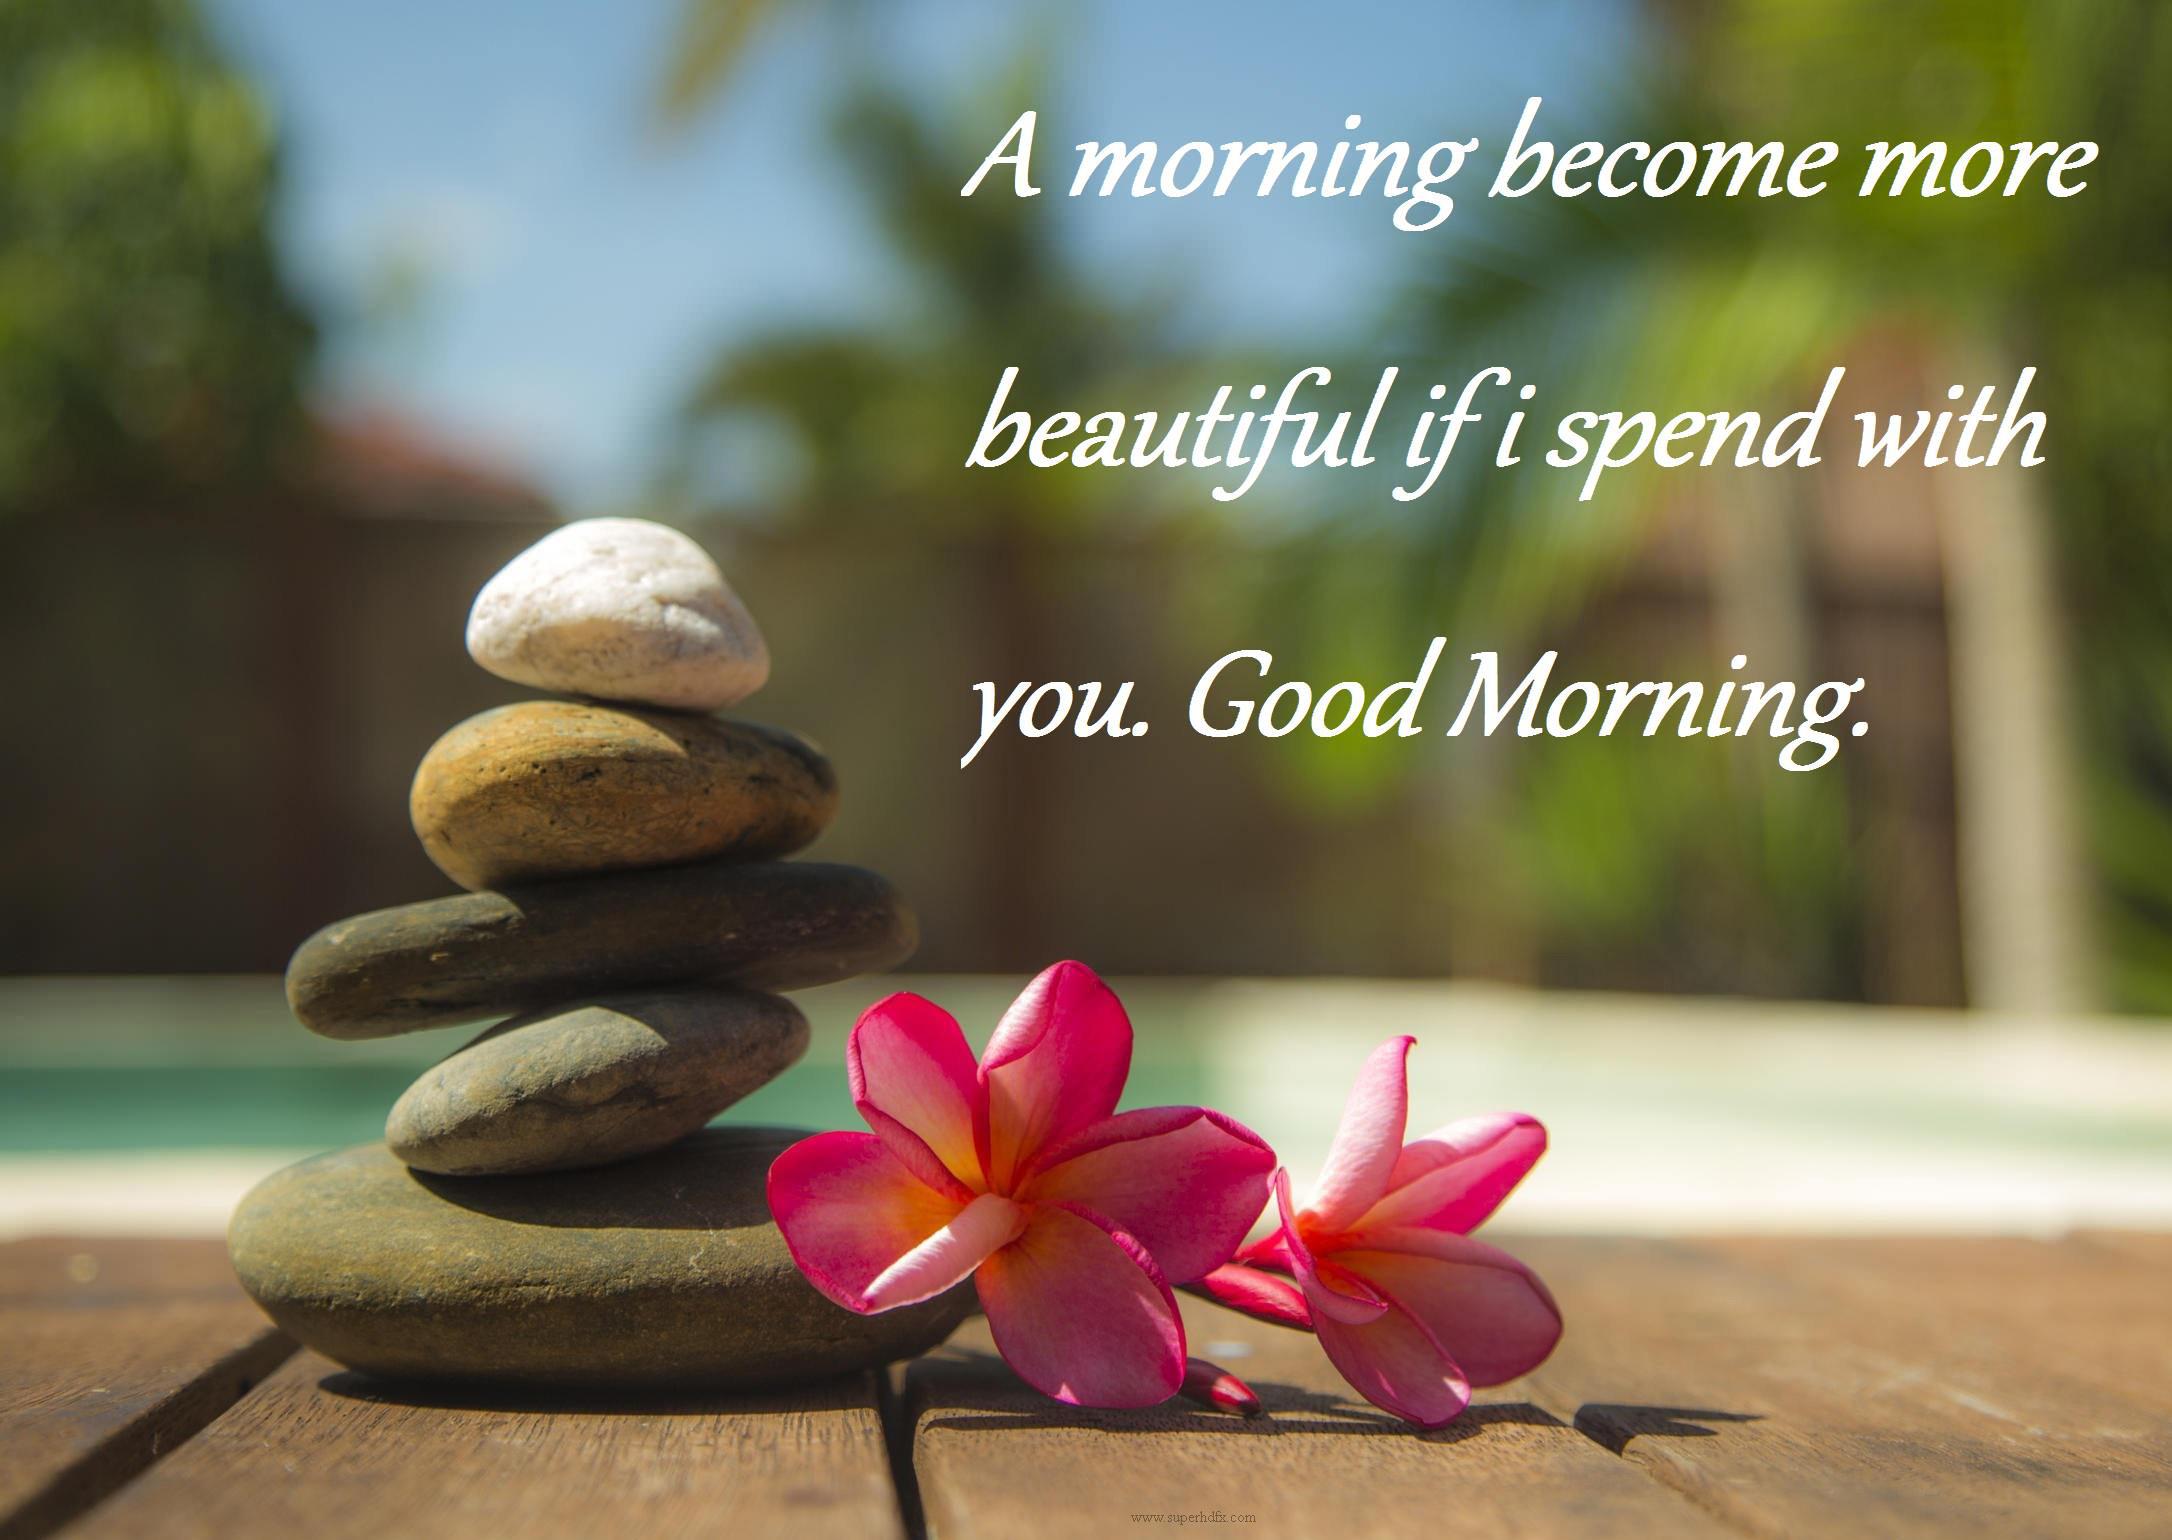 Inspiring Good Morning Quotes with HD Image